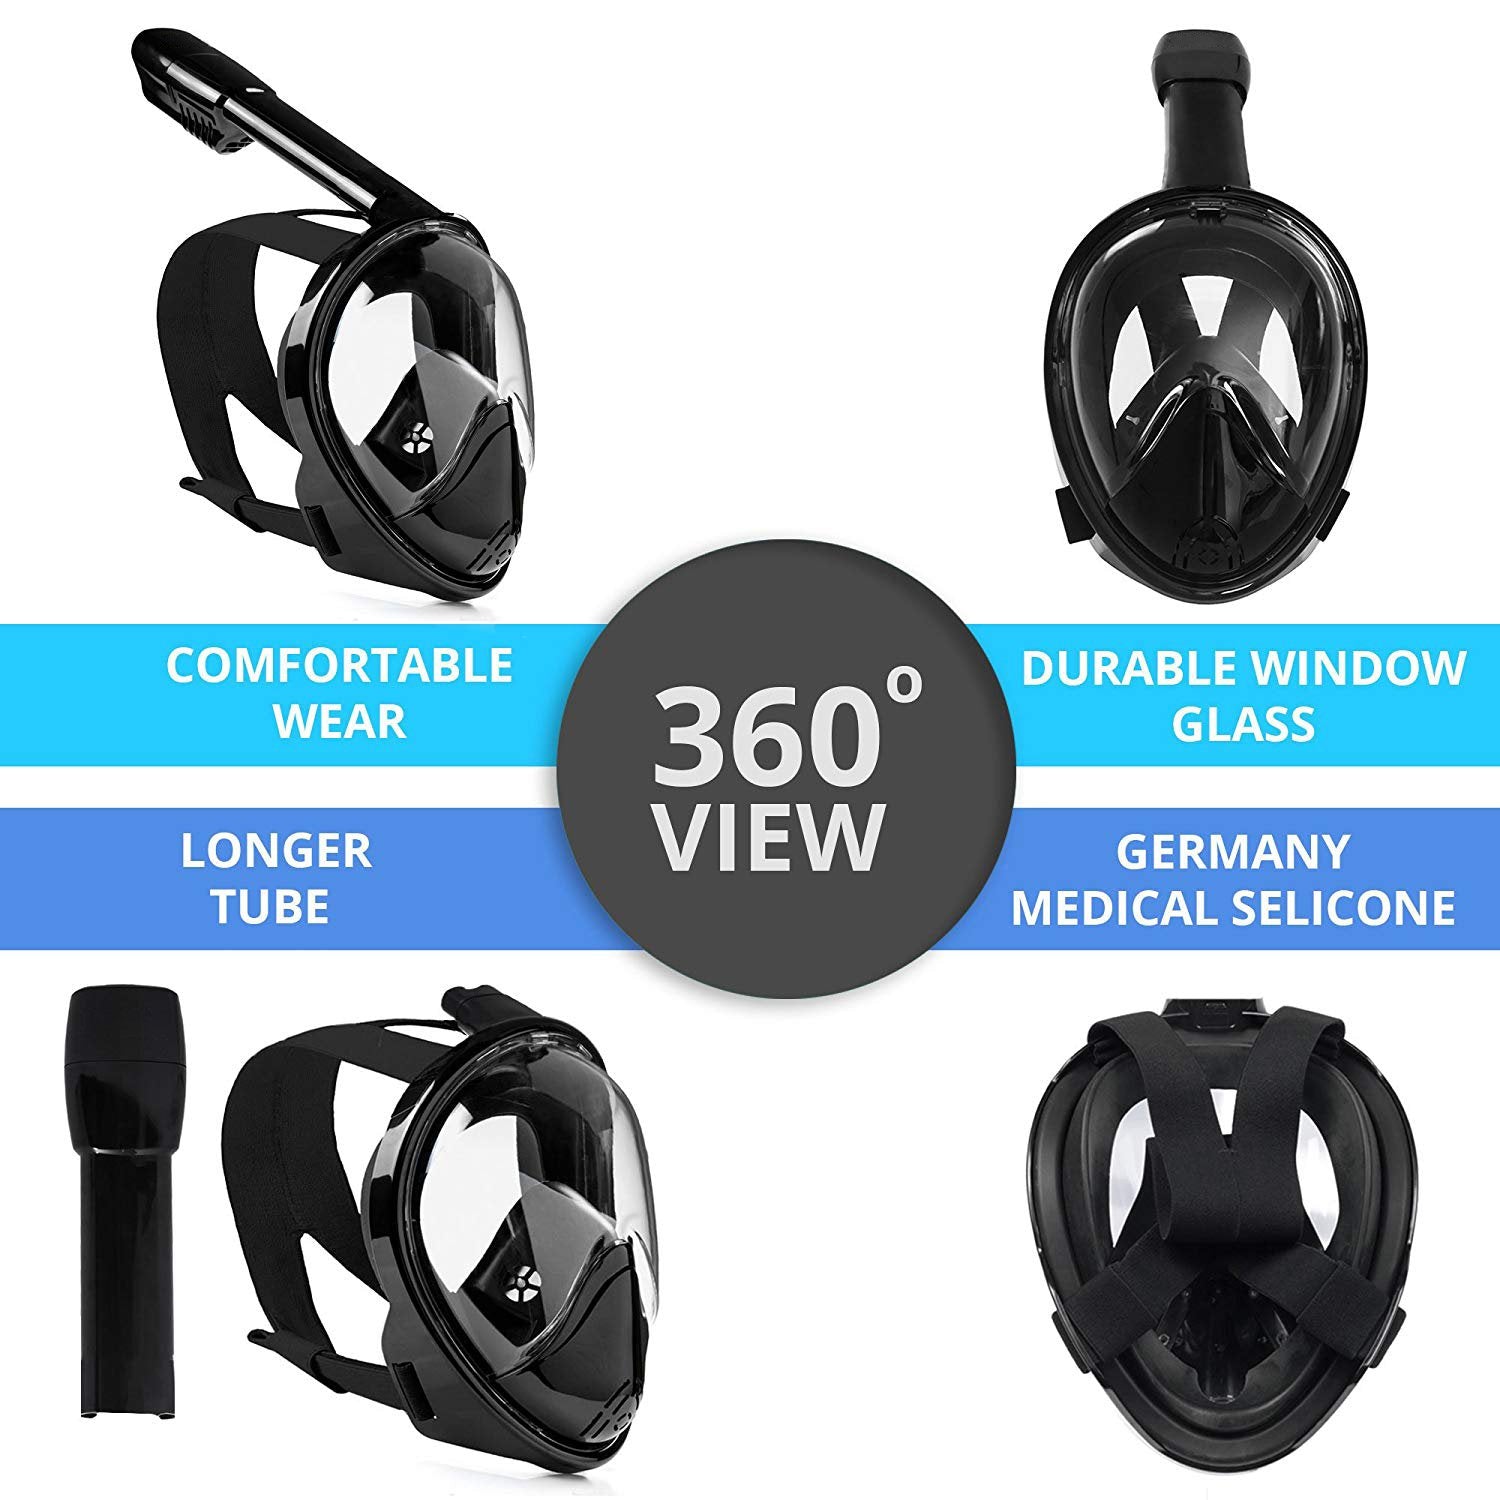 Snorkel Mask - Original Full Face Snorkeling and Diving Mask with 180° Panoramic Viewing